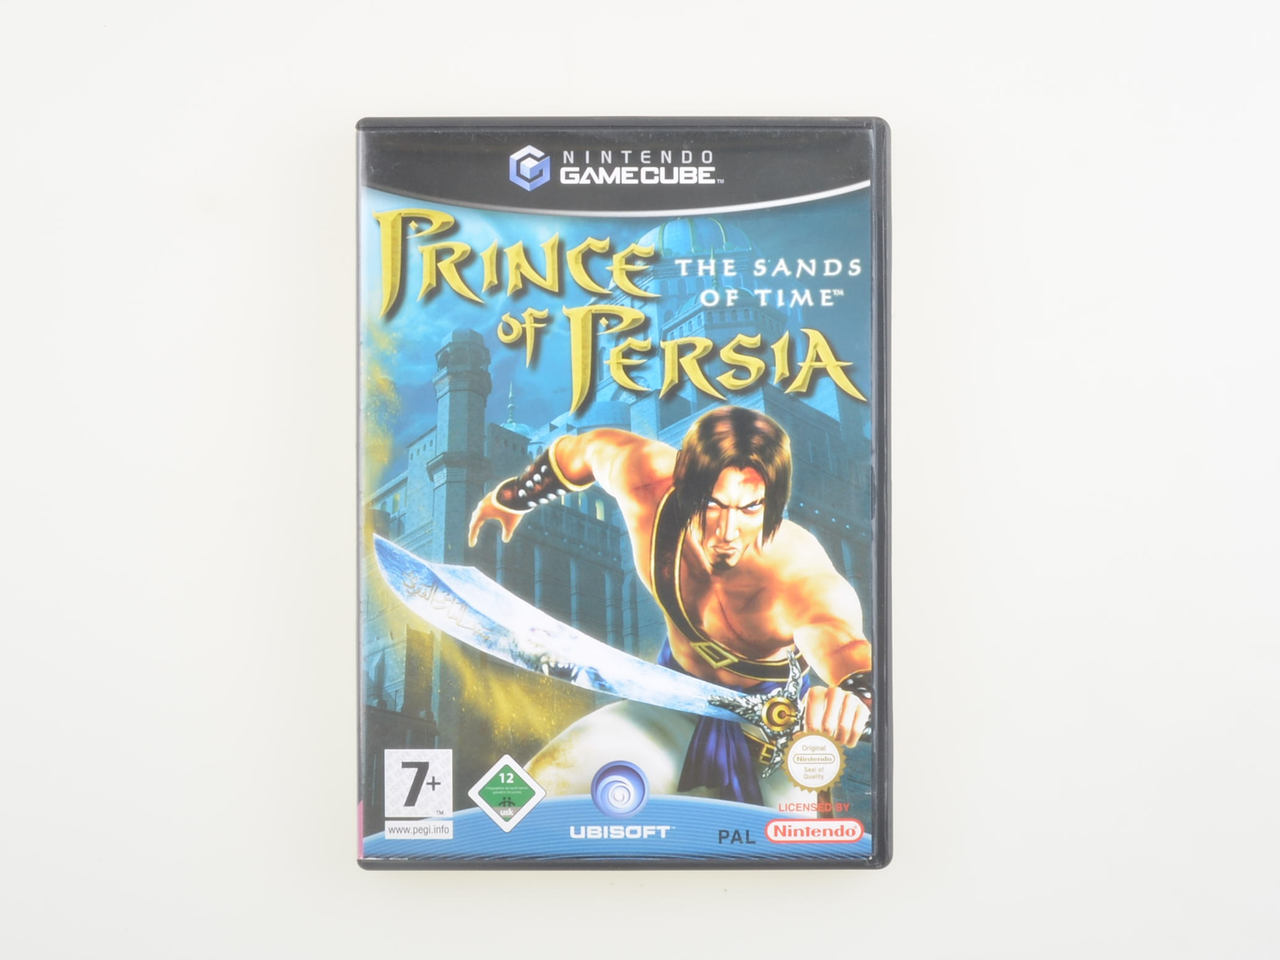 Prince of Persia Sands of Time | Gamecube Games | RetroNintendoKopen.nl